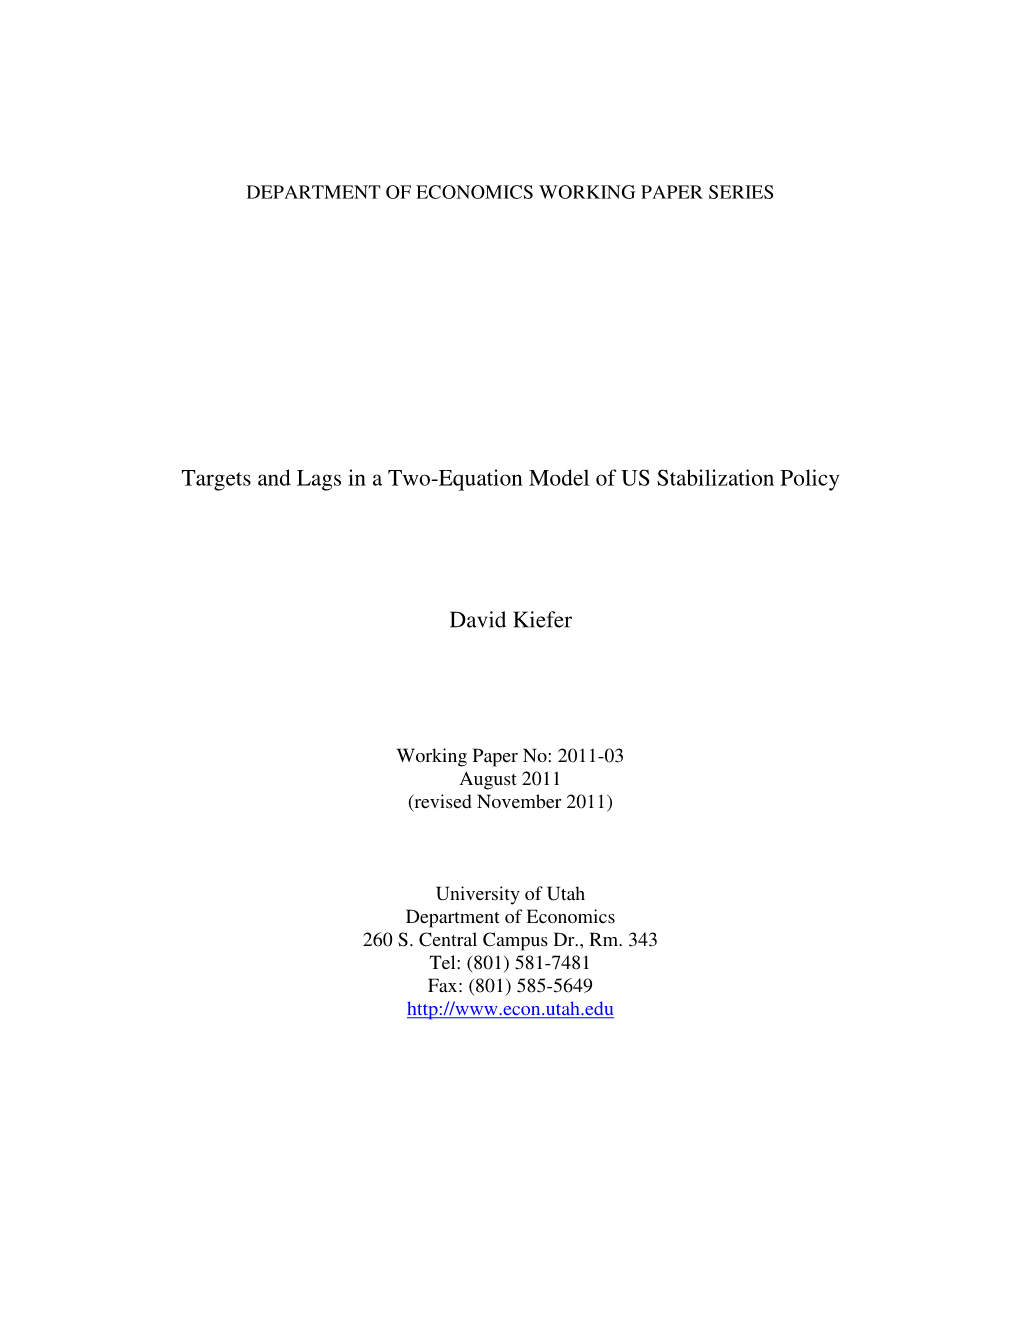 Targets and Lags in a Two-Equation Model of US Stabilization Policy